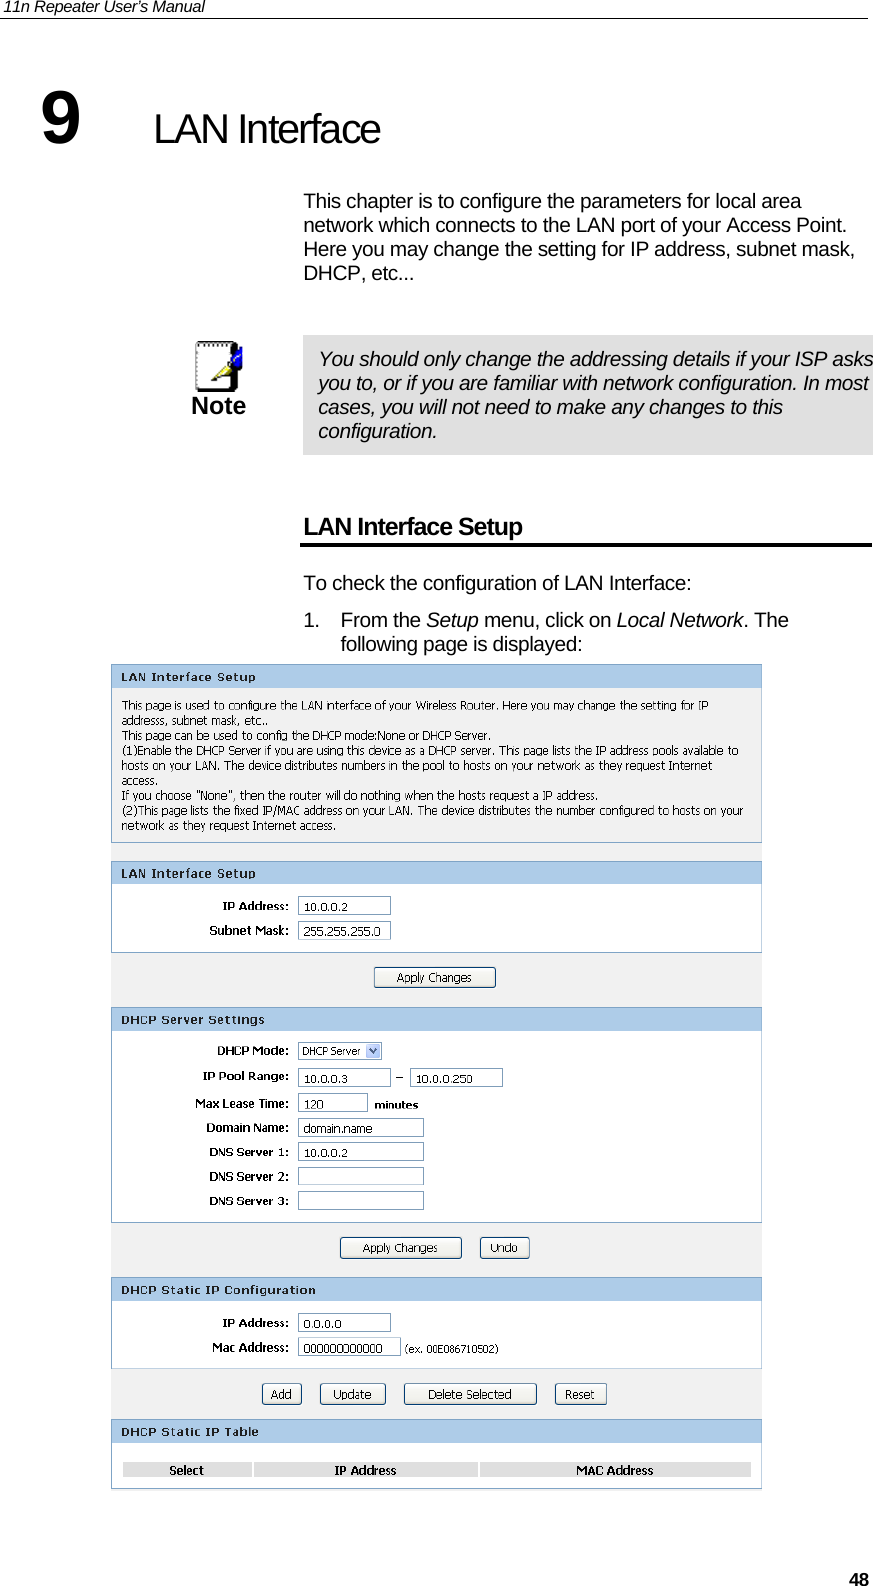 11n Repeater User’s Manual     489  LAN Interface This chapter is to configure the parameters for local area network which connects to the LAN port of your Access Point. Here you may change the setting for IP address, subnet mask, DHCP, etc...   Note  You should only change the addressing details if your ISP asks you to, or if you are familiar with network configuration. In most cases, you will not need to make any changes to this configuration.  LAN Interface Setup To check the configuration of LAN Interface: 1. From the Setup menu, click on Local Network. The following page is displayed:  